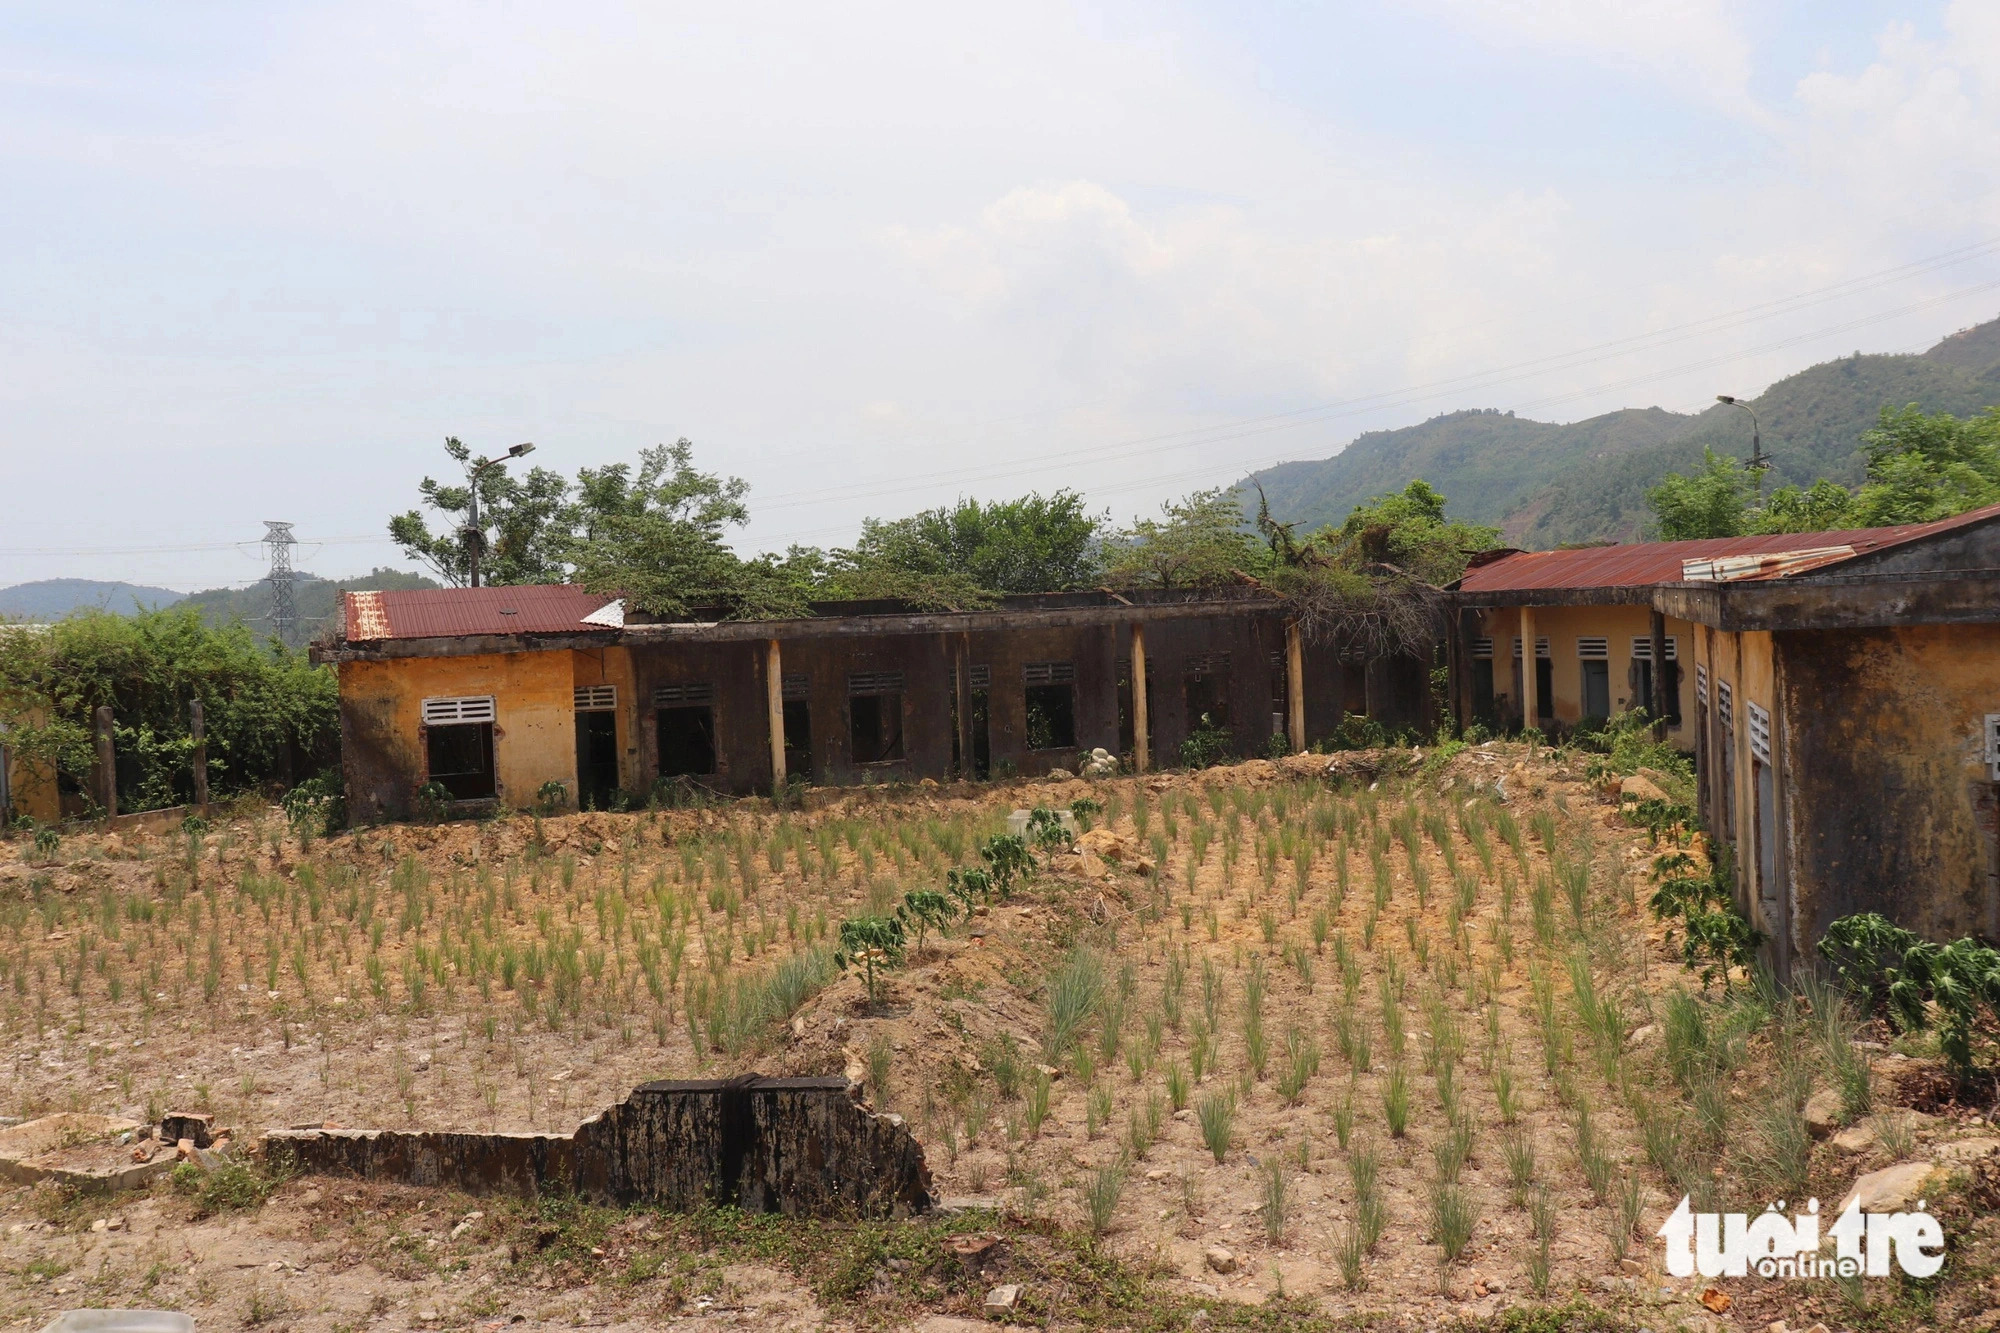 Local inhabitants took advantage of vacant plots of land in the abandoned vocational training center for growing papaya trees and lemongrass plants. Photo: Doan Nhan / Tuoi Tre